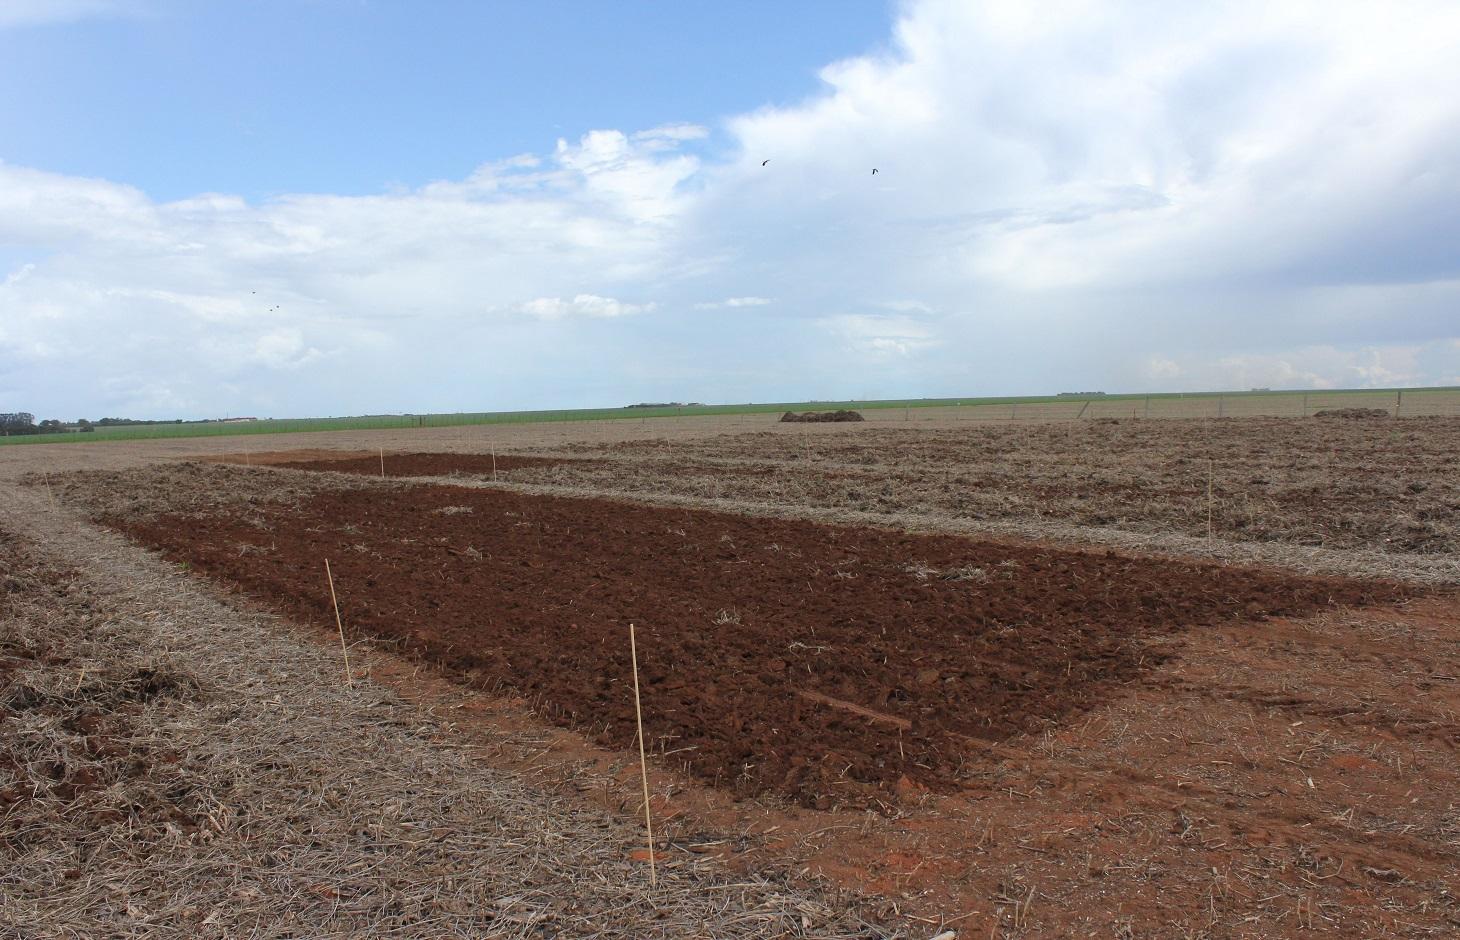 Experimental plots on a tropical agricultural soil (a ferrasol) after organic matter additions.